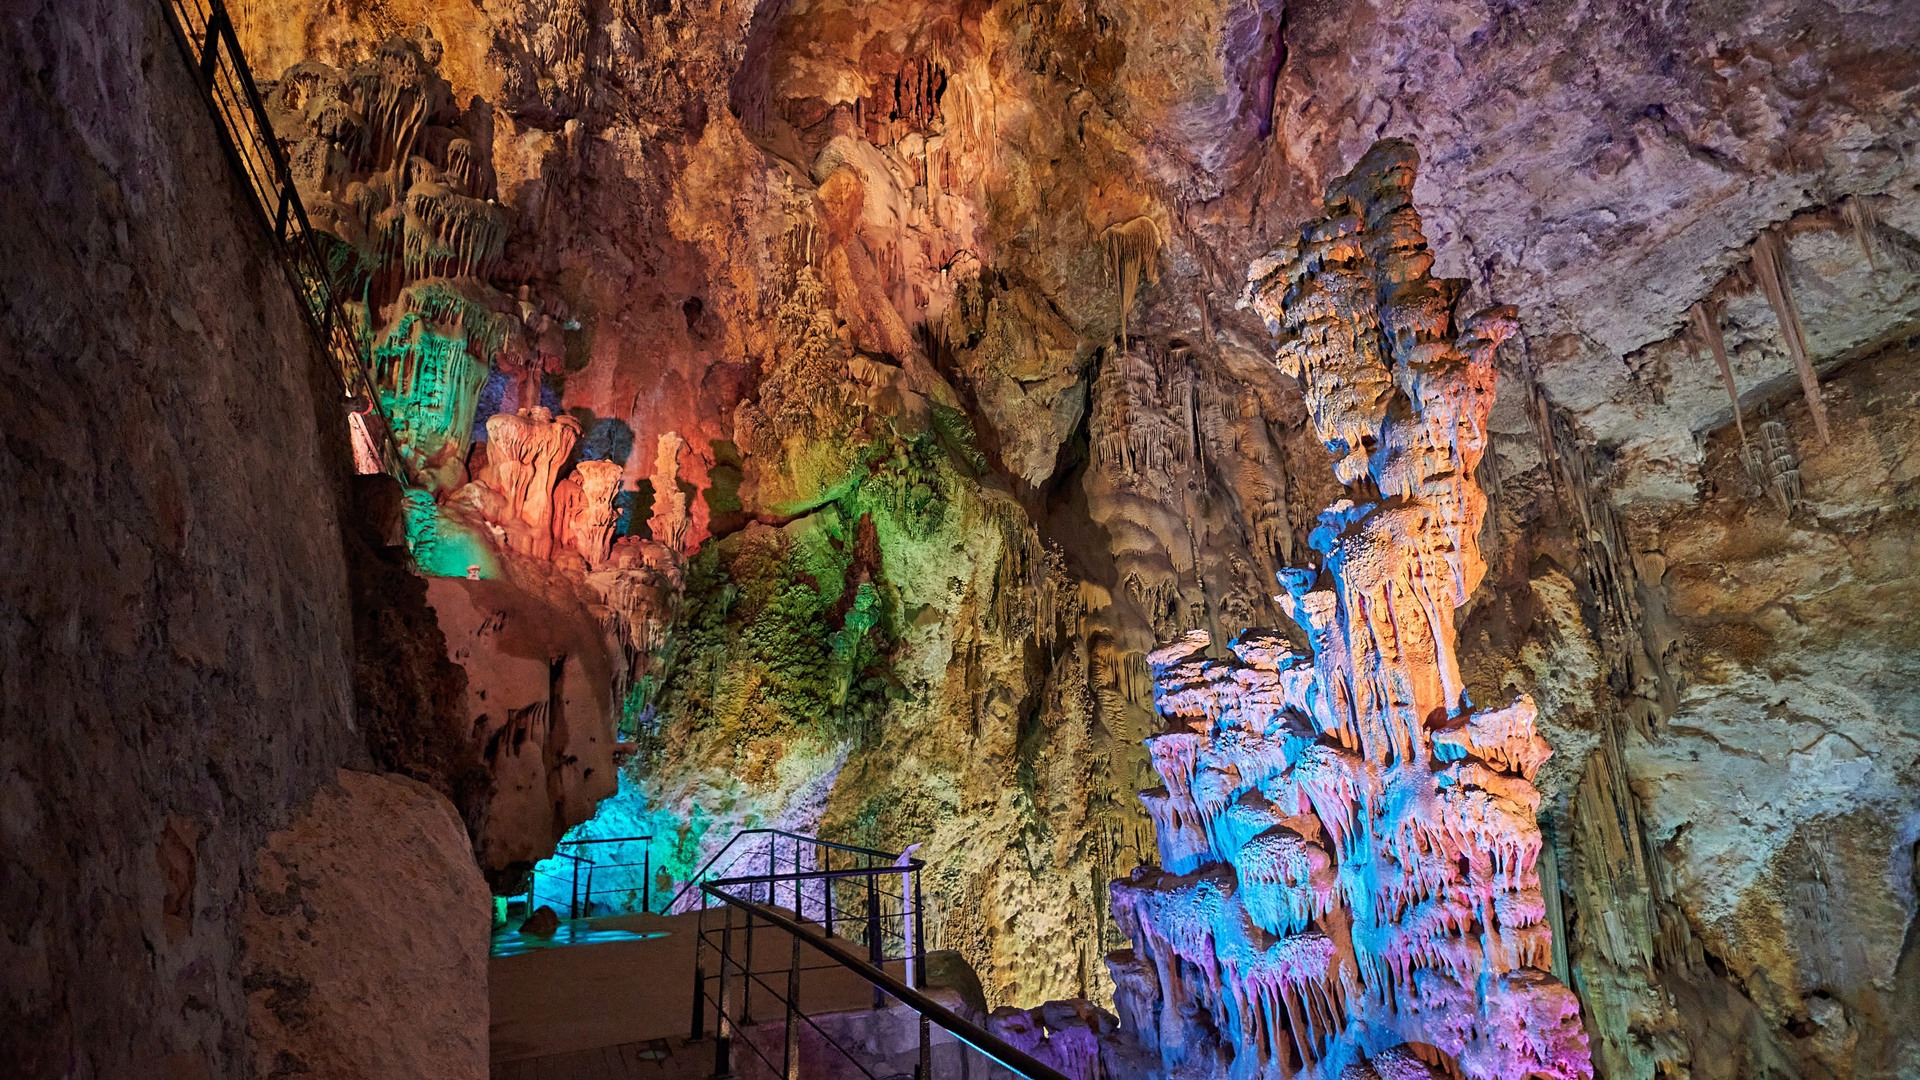 Tip: the Canelobre Caves